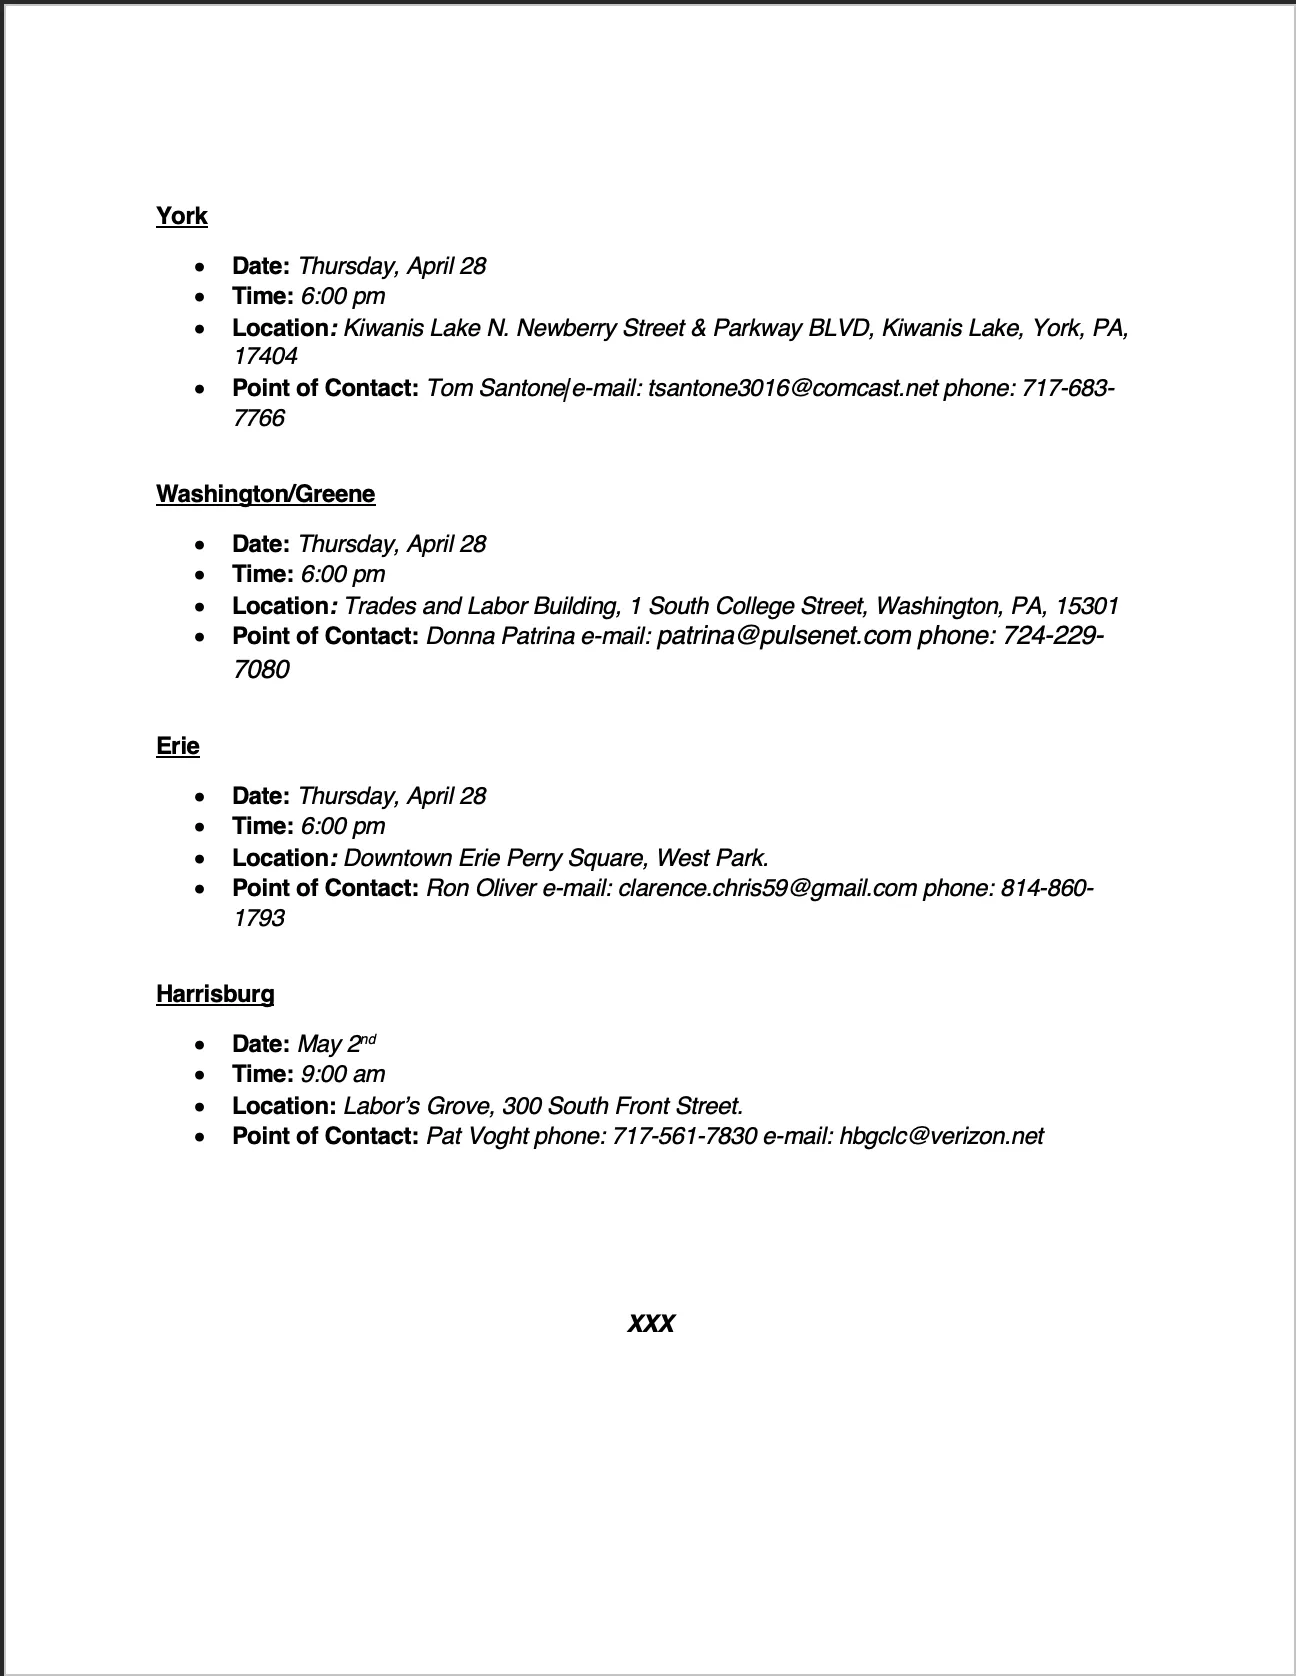 Workers' Memorial Day 2022 Event List Page 2 of 2